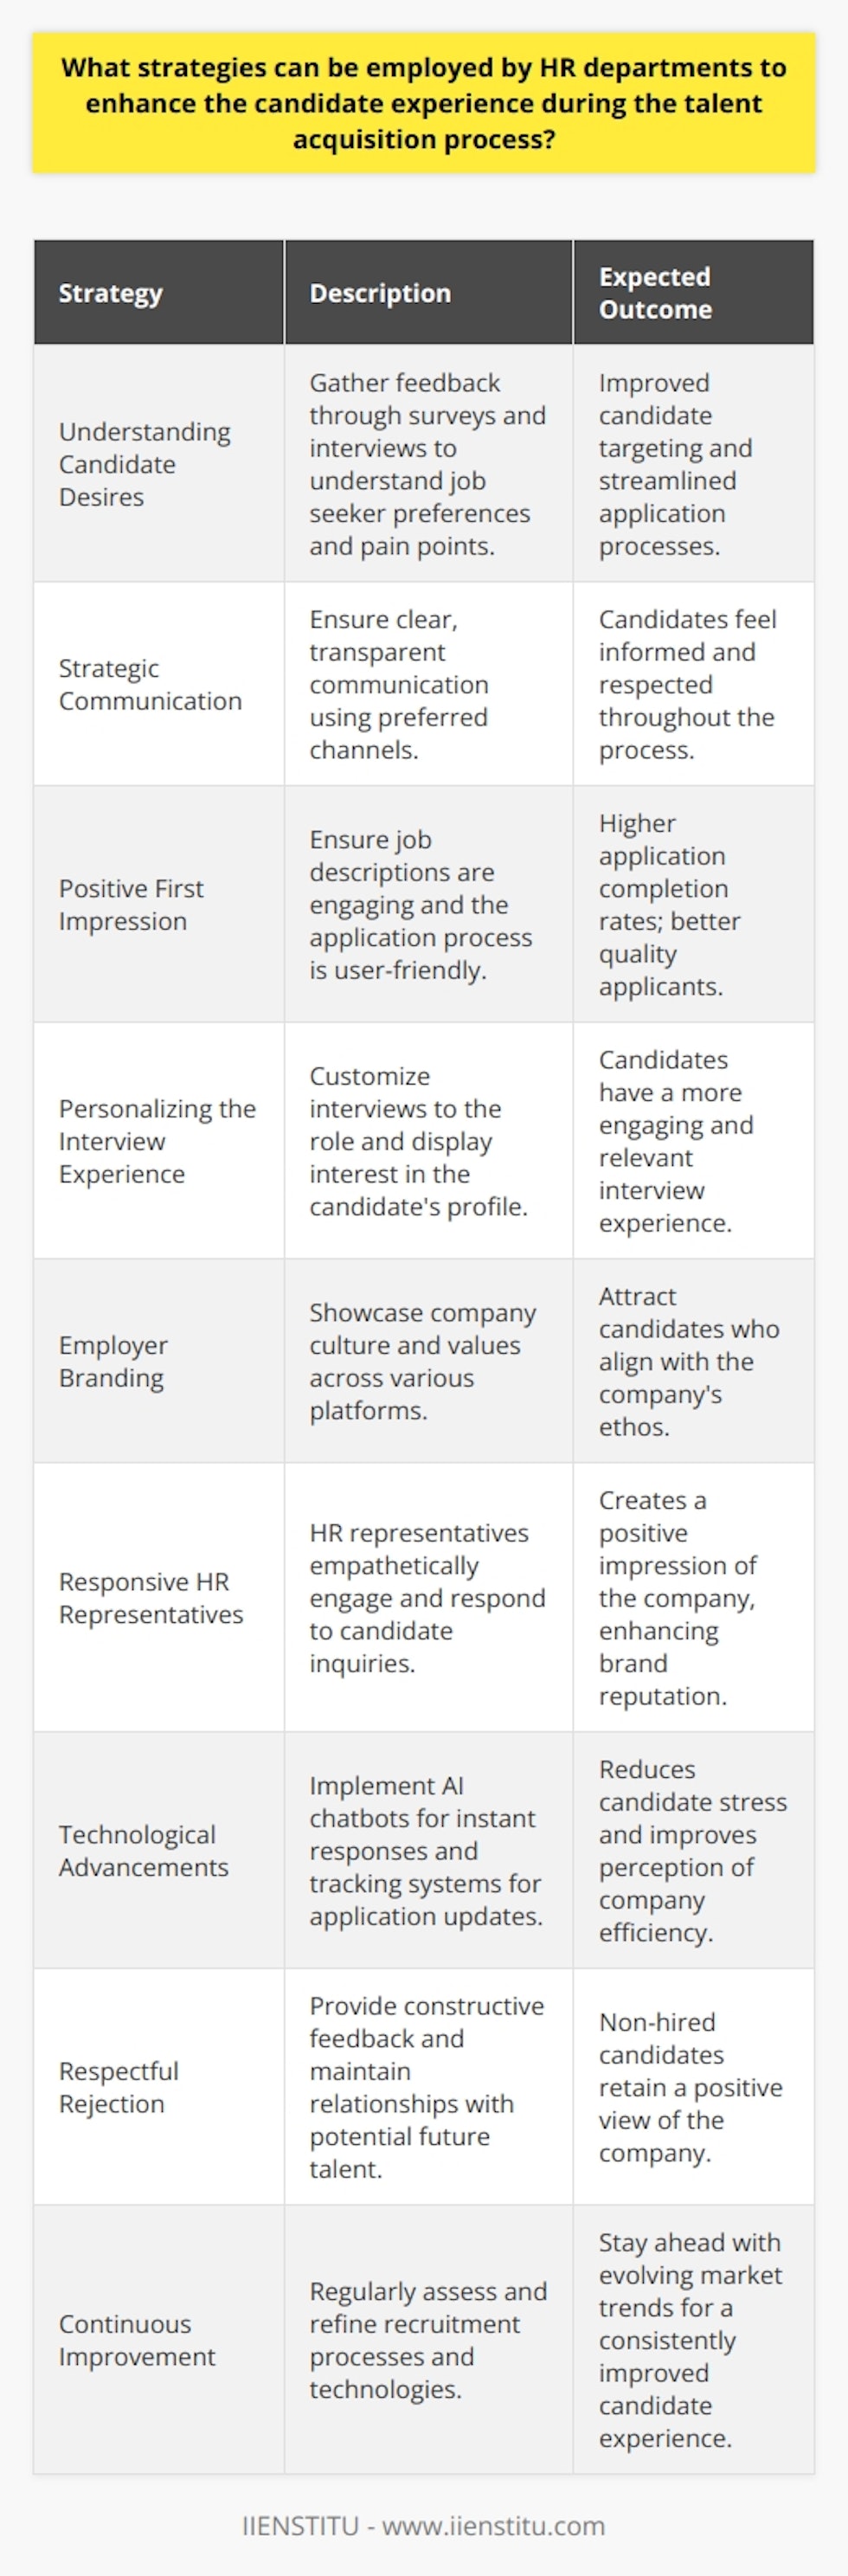 In the competitive landscape of talent acquisition, HR departments play a critical role in not just attracting but also providing an exceptional experience to candidates. Improving the candidate experience is fundamental for organizations seeking to attract top talent and build a strong employer brand. Here are some strategies that HR departments can employ to enhance the candidate experience during the talent acquisition process:**Understanding Candidate Desires and Pain Points**It starts with a deep understanding of what candidates are seeking in a job and an employer, as well as the frustrations they typically encounter during the job search. Regularly gathering feedback through surveys and interviews with past and current candidates can provide insights that inform better processes.**Strategic Communication**Communication is at the heart of the candidate experience. HR departments should aim for transparency, providing candidates with clear timelines and expectations from the outset. Information should be conveyed through preferred channels, whether it's email, phone, or messaging services, ensuring that candidates are never left in the dark about their application status.**Creating a Positive First Impression**The job description and the application process are a candidate's first interaction with the company. Hence, it's important to ensure that job listings are accurate, inclusive, and engaging. Furthermore, the application process should be user-friendly, respecting the candidate's time and effort.**Personalizing the Interview Experience**Personalization can make candidates feel valued. HR should strive to tailor the interview process to fit the role, incorporating role-specific tasks or discussions. Interviewers can also make the interaction more engaging by demonstrating a genuine interest in the candidate's aspirations and experiences.**Employer Branding**Strategic efforts in employer branding can greatly impact the candidate experience. Showcasing company culture, values, and employee experiences through various platforms can attract candidates who align with the organization's ethos and are more likely to have a positive view of the company.**Responsive and Empathetic HR Representatives**Candidates appreciate when HR representatives are responsive to inquiries and display empathy. These representatives act as the face of the company, and their interactions can leave a lasting impression on candidates, regardless of the outcome of their application.**Investment in Technological Advancements**Tools like AI-powered chatbots can provide instant responses to common candidate questions. Applicant tracking systems can ensure candidates receive timely updates on their application status, helping to alleviate the stress of waiting for a response.**Respectful Rejection**In cases where candidates are not selected for the role, HR departments can provide respectful and constructive rejections that offer insights or recommendations for future applications. This approach can leave a positive impression and maintain a relationship with potential future talent.**Continuous Improvement**Just as markets and technologies evolve, so too should the candidate experience. HR departments should continuously assess and refine their processes, incorporating new strategies and technologies that can make the recruitment journey more pleasant and engaging for candidates.By implementing these strategies, HR departments can distinguish their companies in the job market as an employer of choice, ensuring that every candidate interaction is a projection of the company’s dedication to respect, inclusivity, and professionalism. It is not merely about filling positions; it's about building meaningful connections that may lead to lasting relationships, whether a candidate is ultimately hired or not.